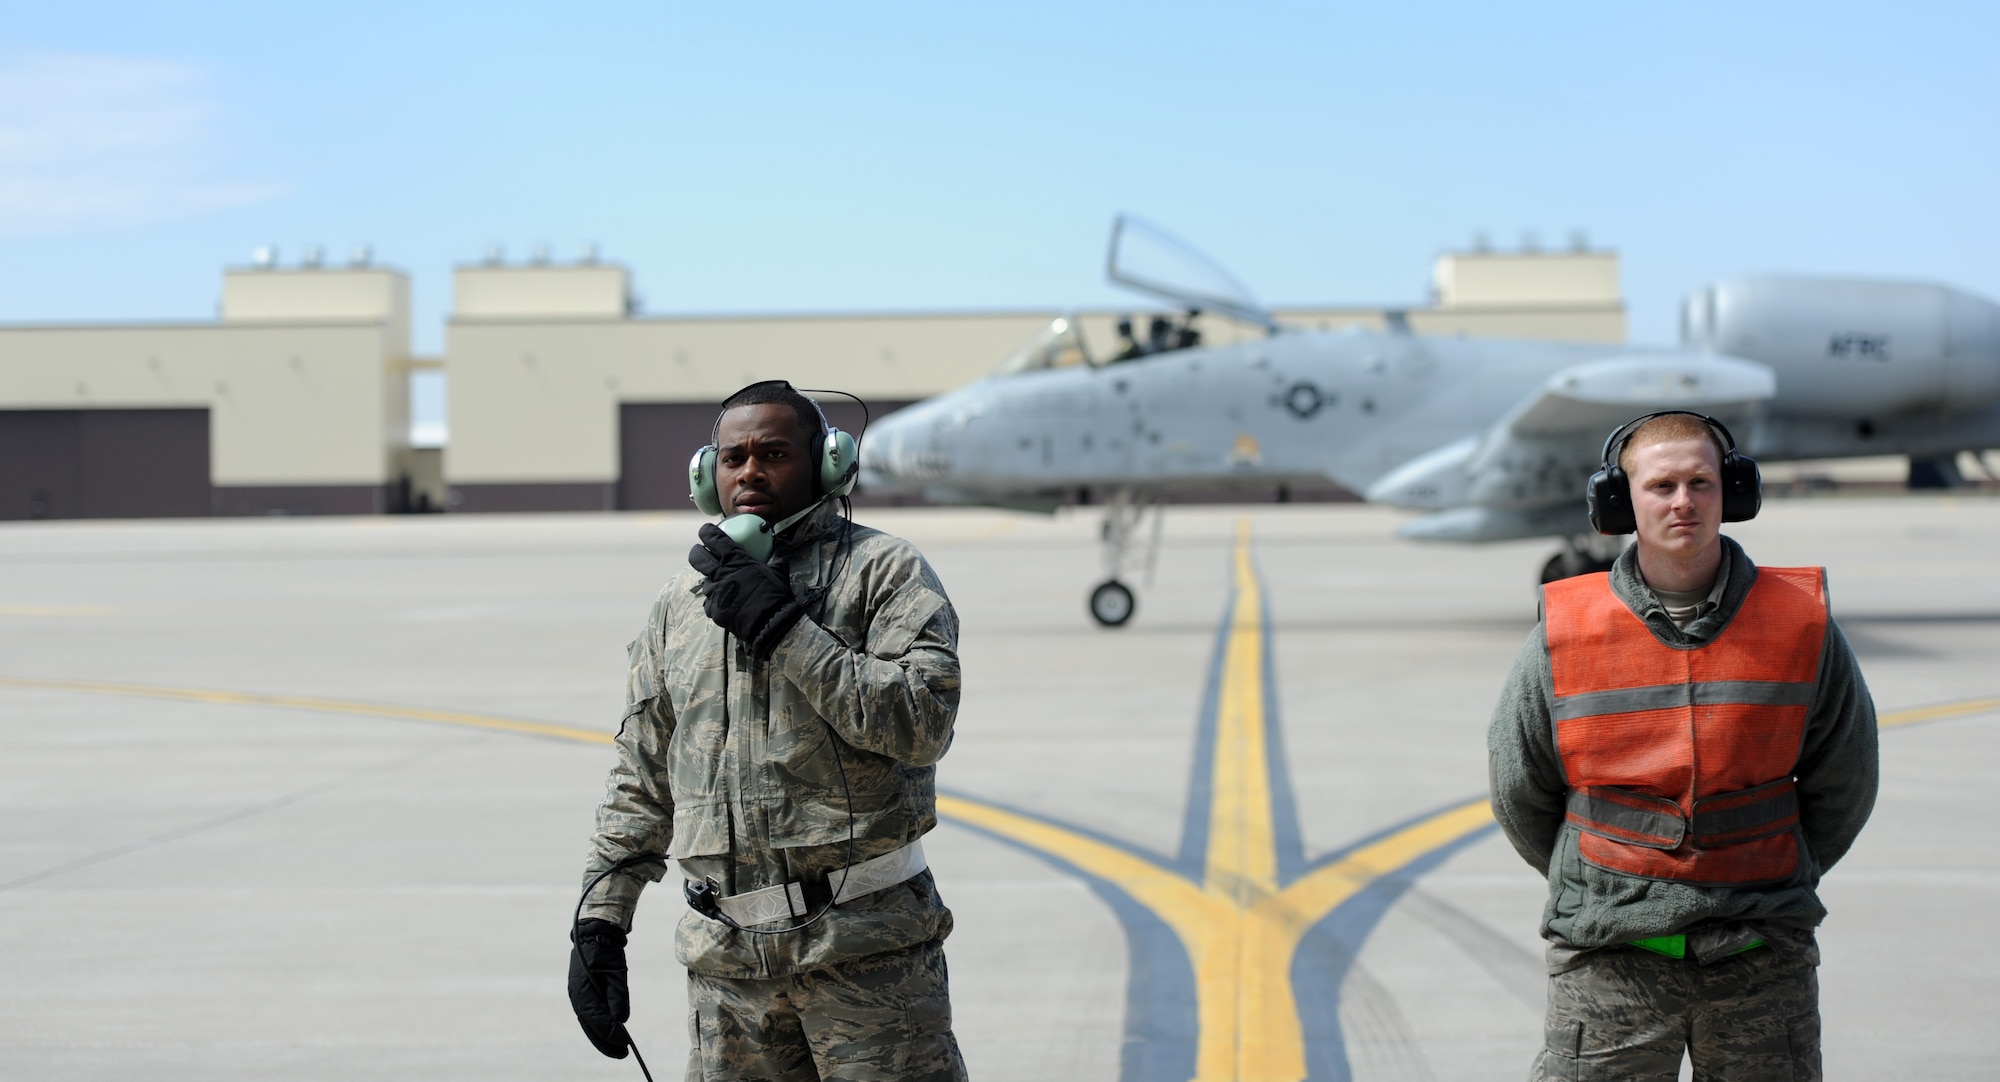 Airman 1st Class Steven McCray, 13th Aircraft Maintenance Unit B-2 Spirit crew chief, and Airman 1st Class James Fulton, 13th Aircraft Maintenance Unit B-2 crew chief, perform pre-flight checks at Whiteman Air Force Base, April 5, 2013.  Fulton and McCray are two of more than 160 crew chiefs that are responsible for ensuring each B-2 assigned to Whiteman Air Force Base is mission ready. (U.S. Air Force photo by Staff Sgt. Nick Wilson/Released)